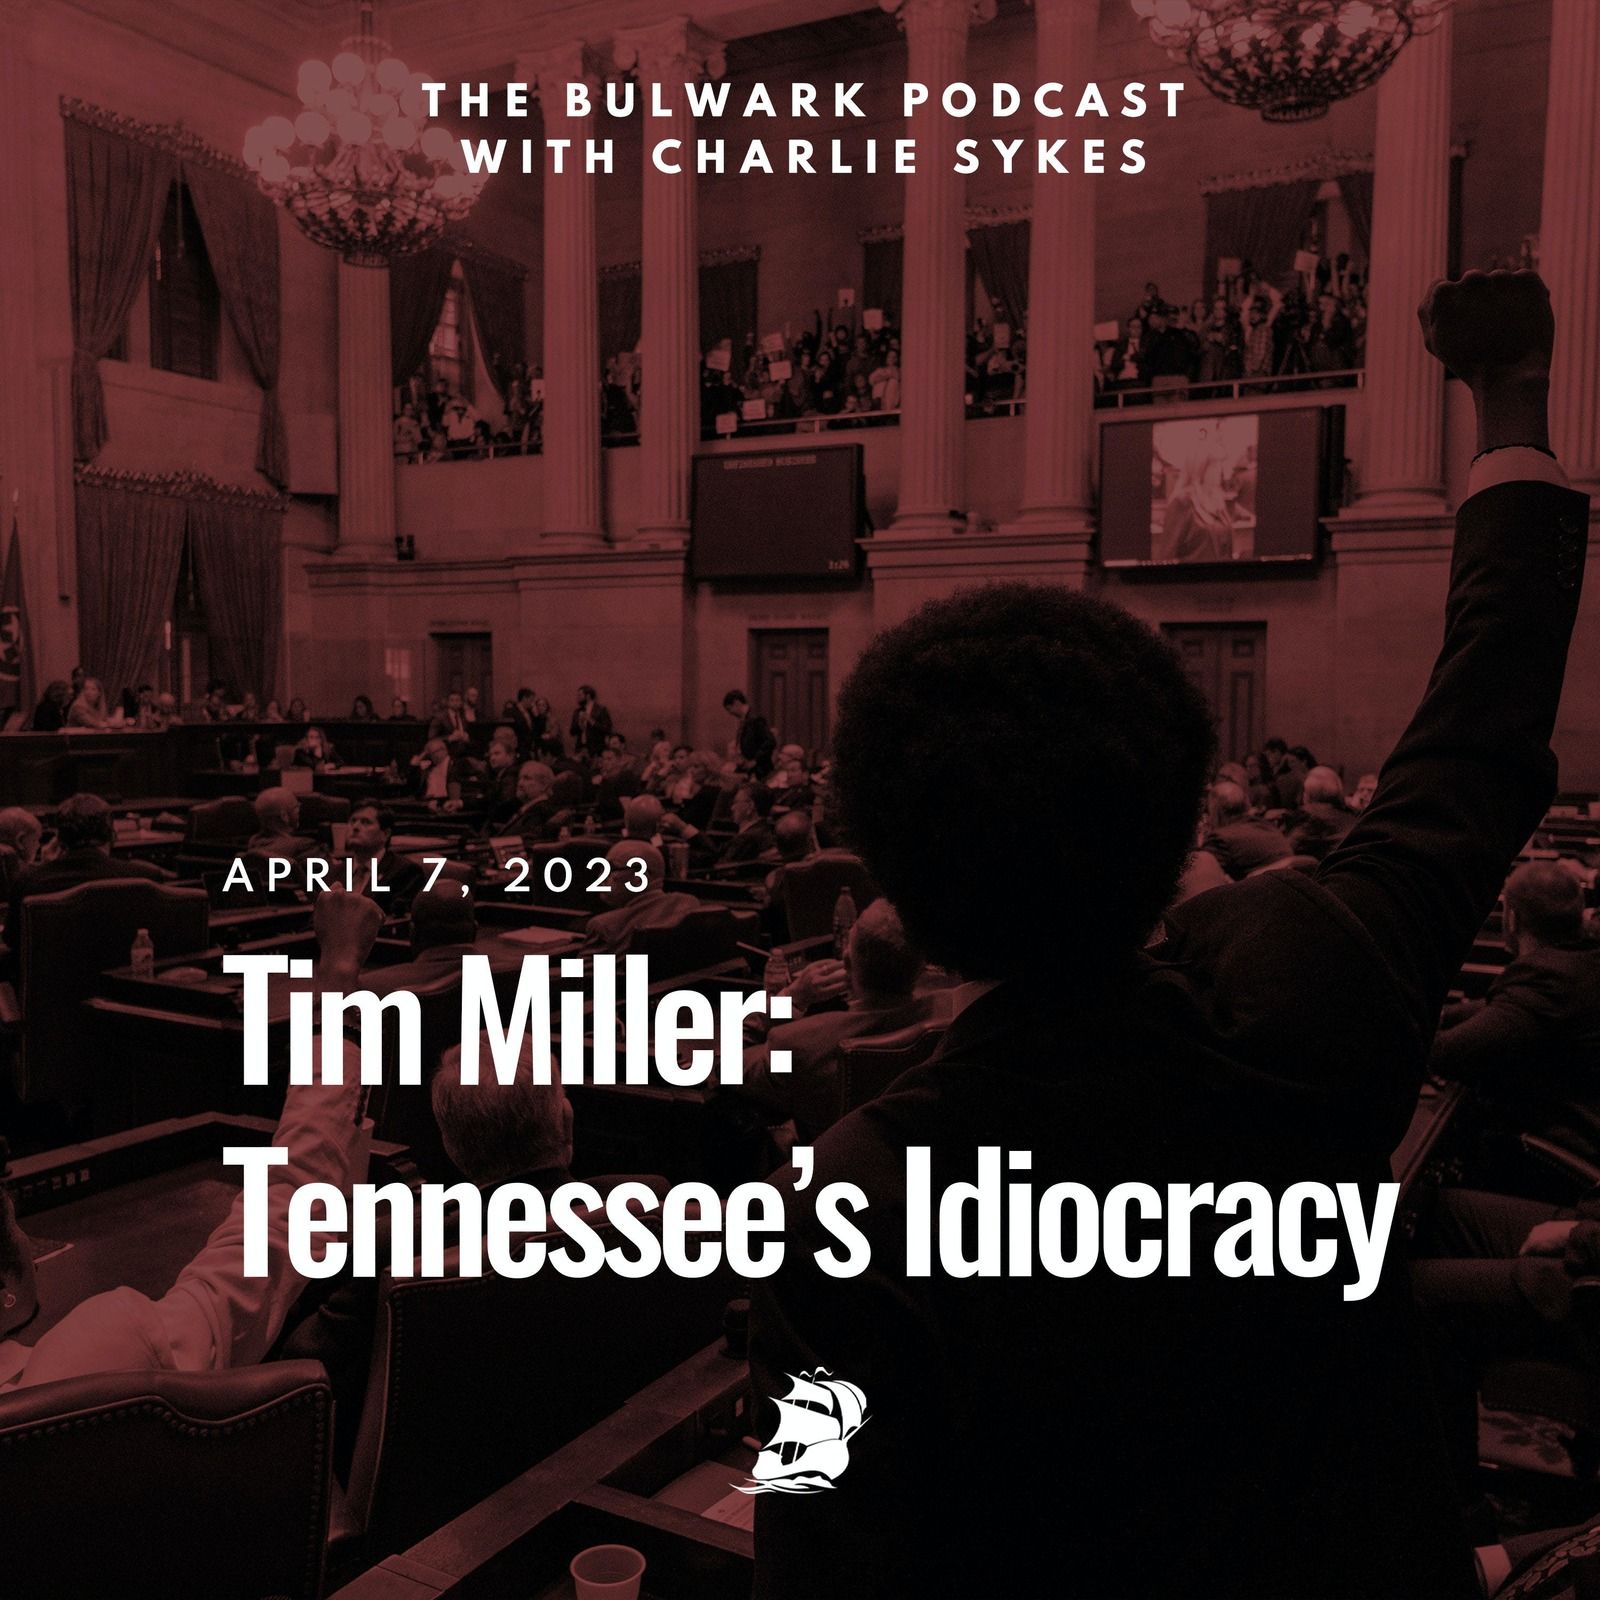 Tim Miller: Tennessee’s Idiocracy by The Bulwark Podcast